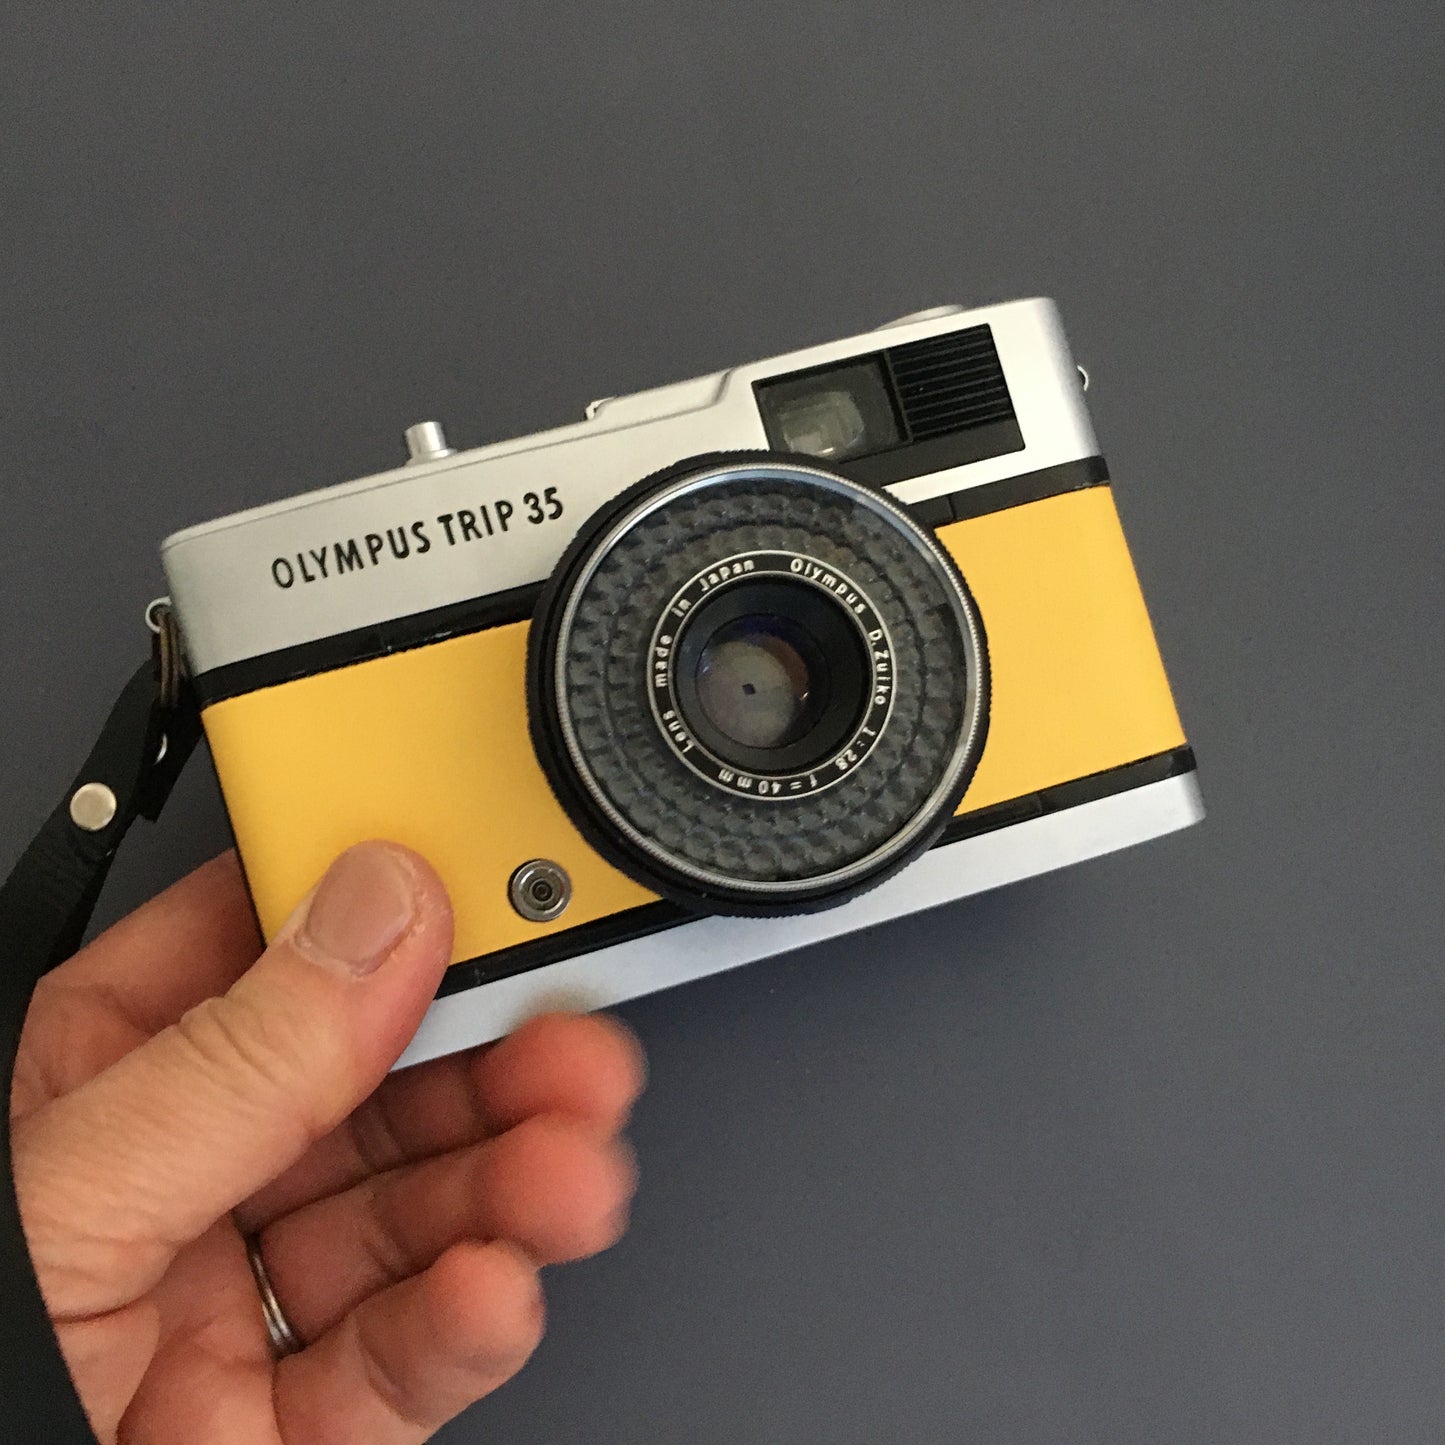 Olympus TRIP35 with yellow lether